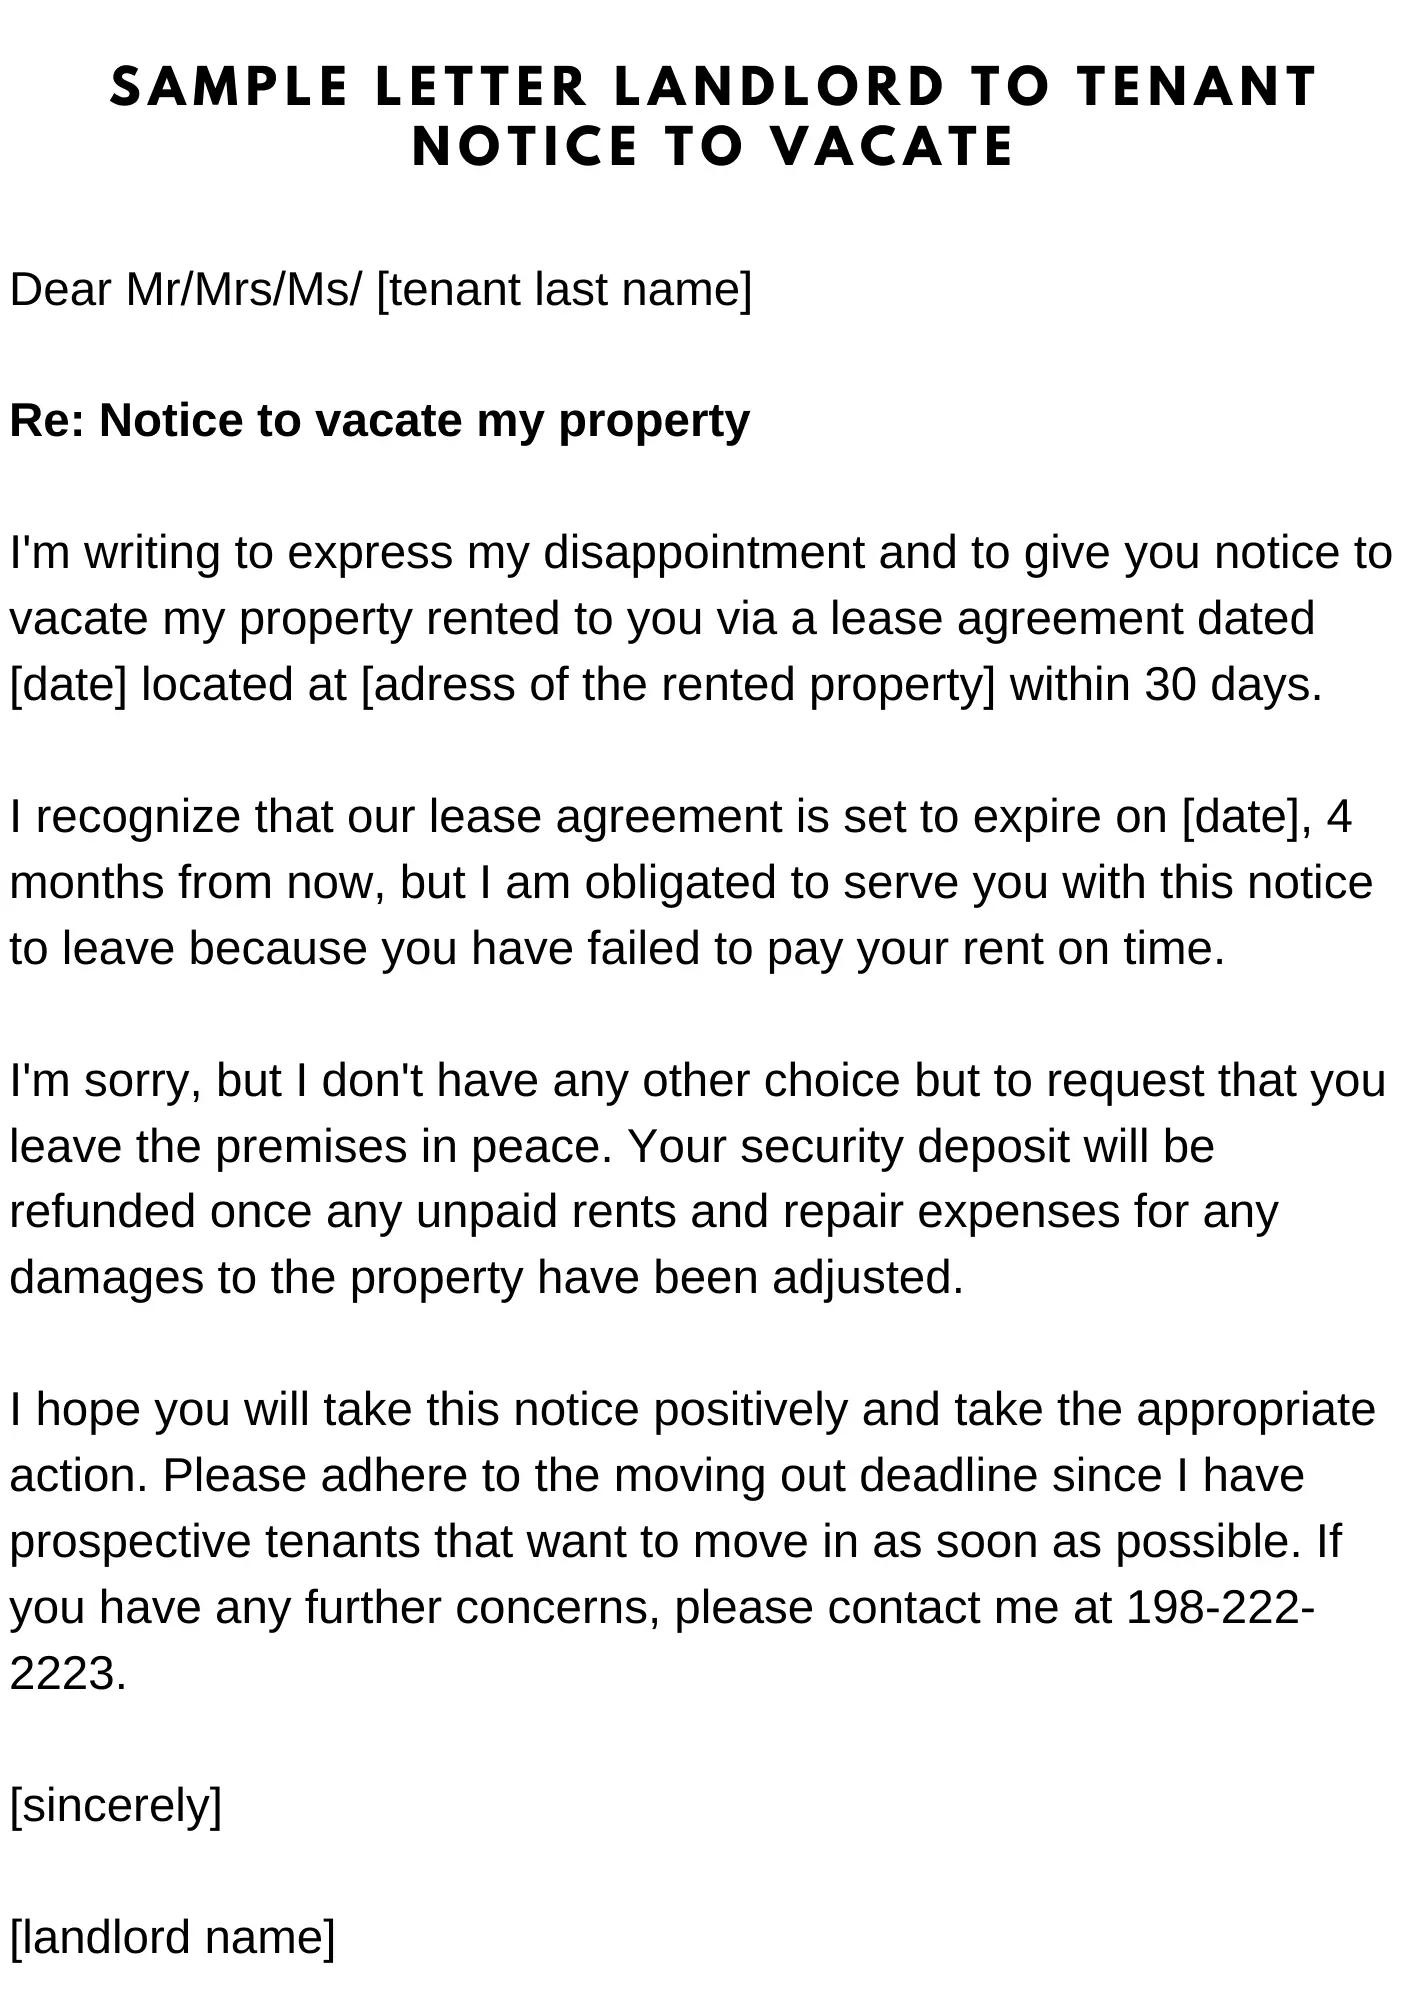 letter requesting rent payment